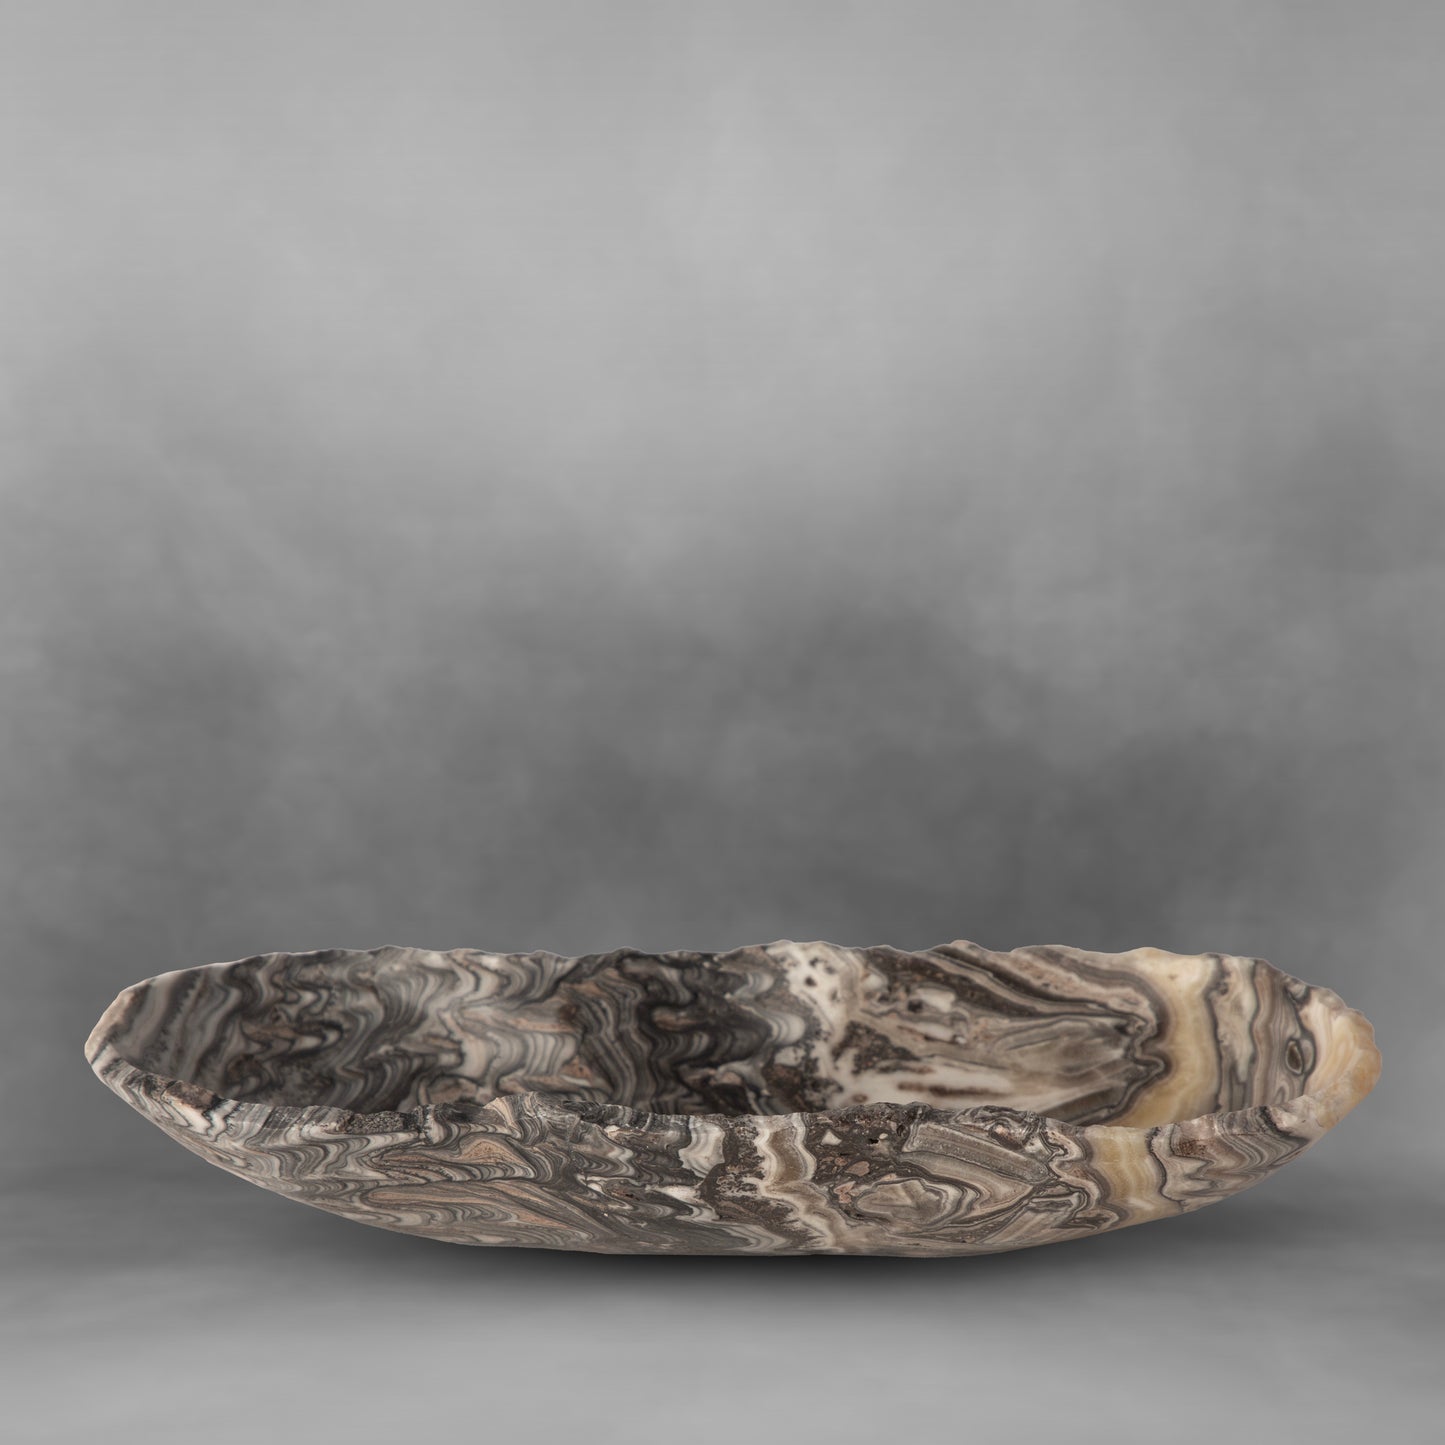 Natural stone art, abstract grays with brushstrokes of white, onyx candy bowl (small)